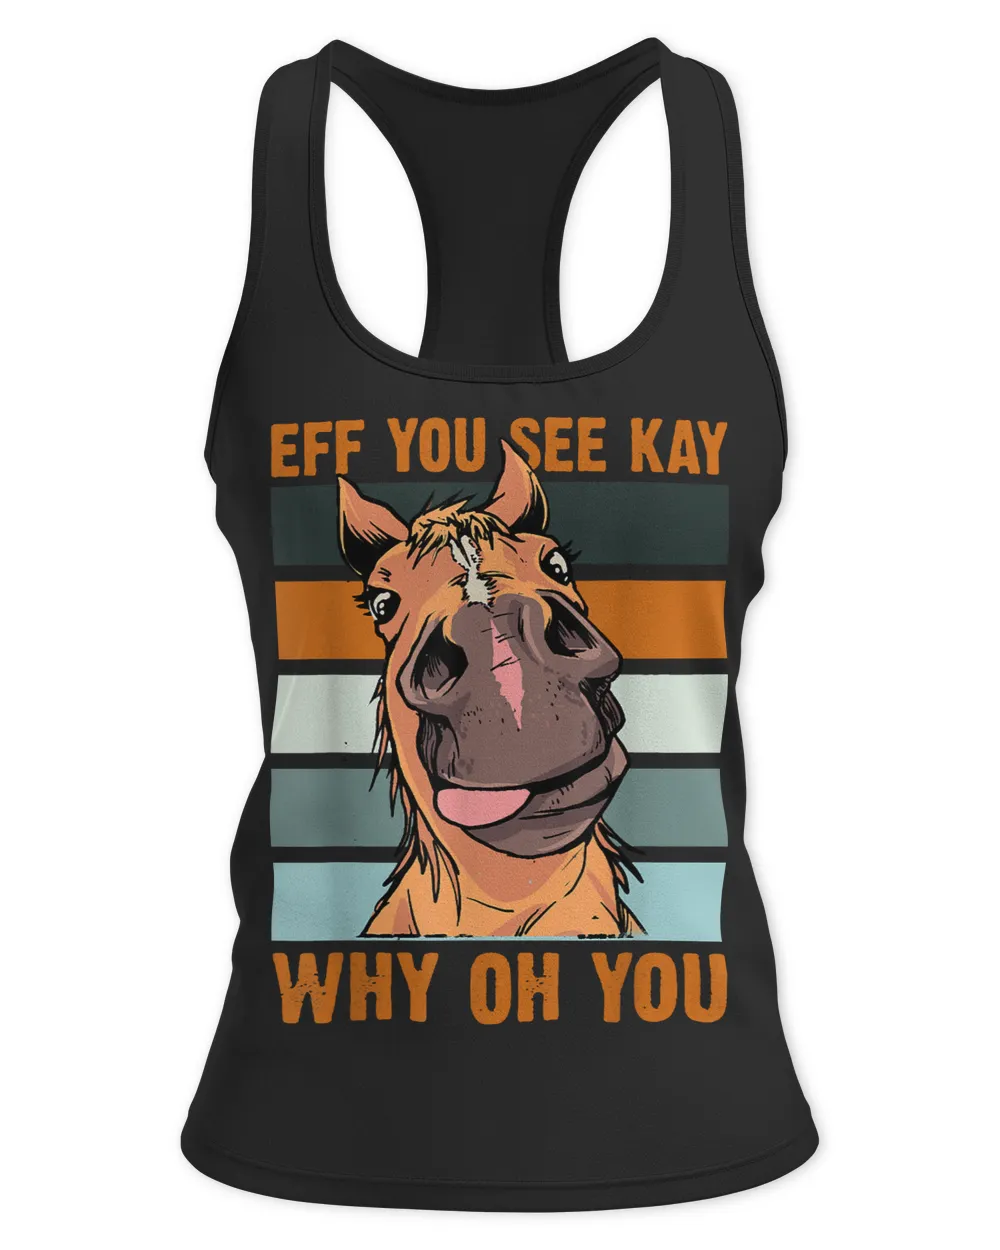 Eff You See Kay Why Oh You Yoga Workout Horse 2